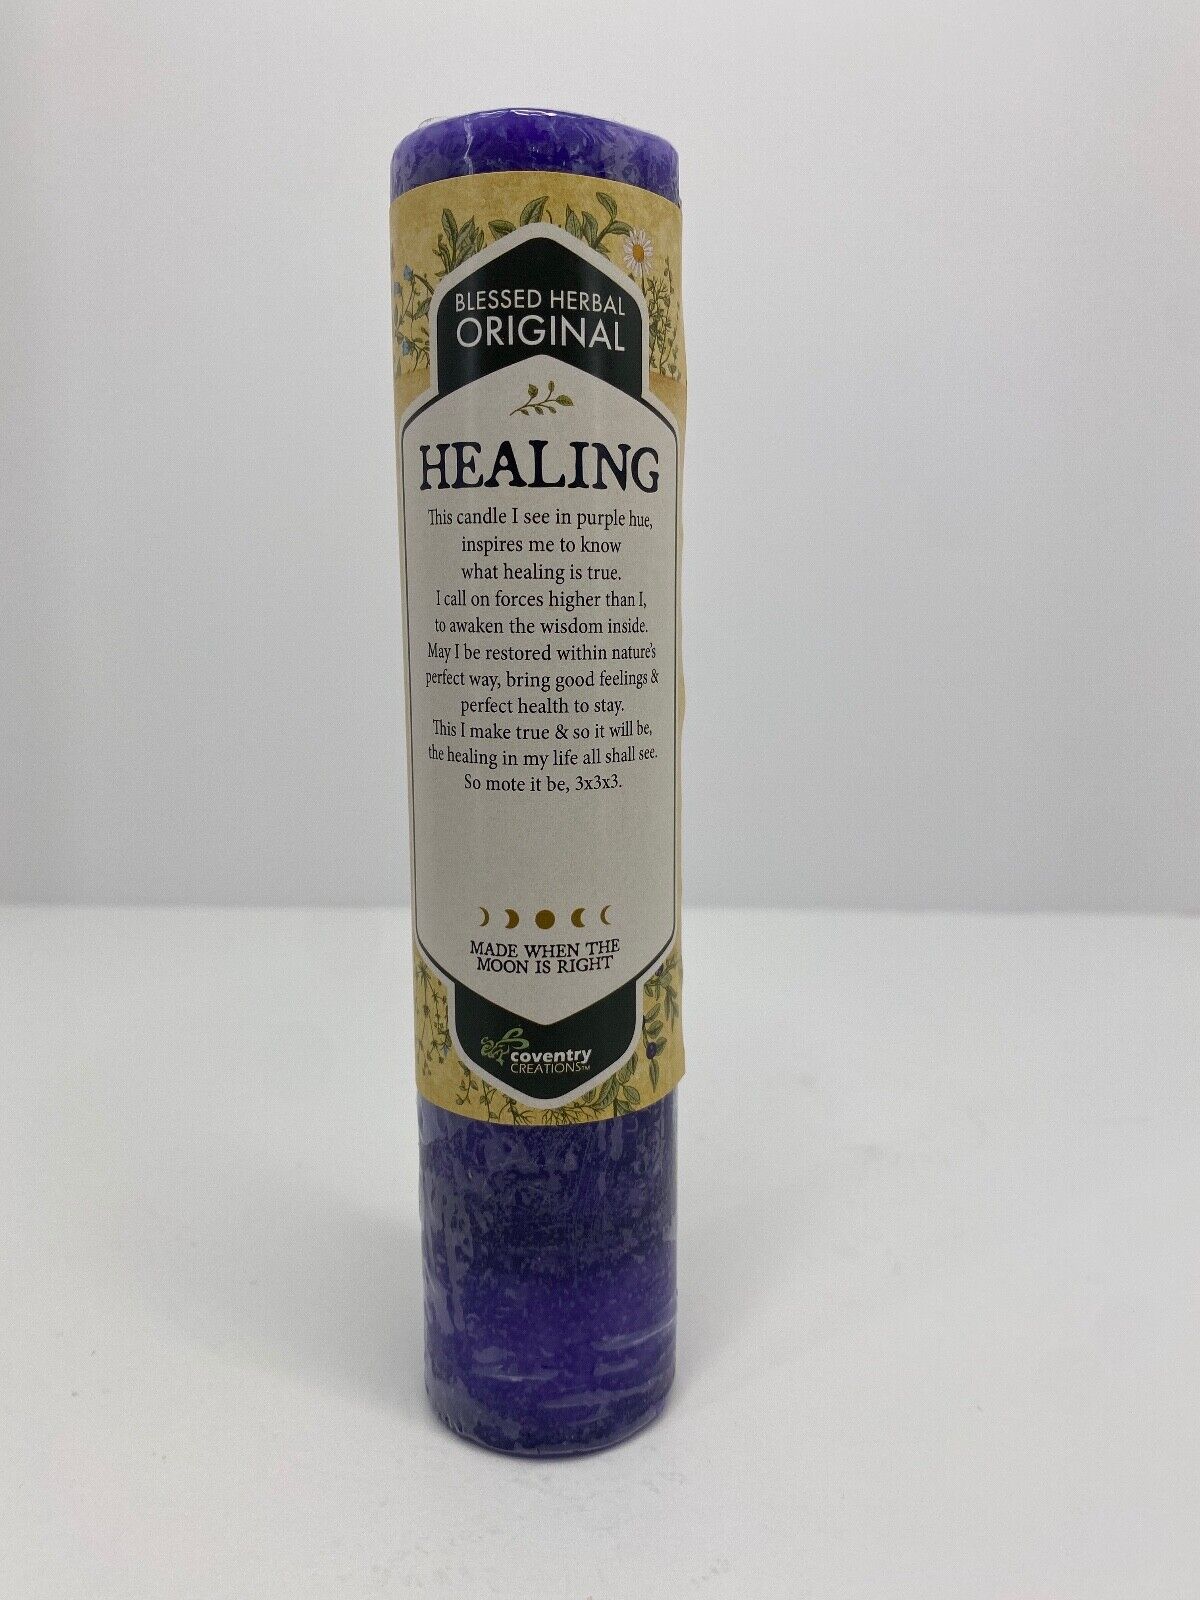 Coventry Creations Purple Candle Blessed Herbal Originals HEALING 40 Hour Burn